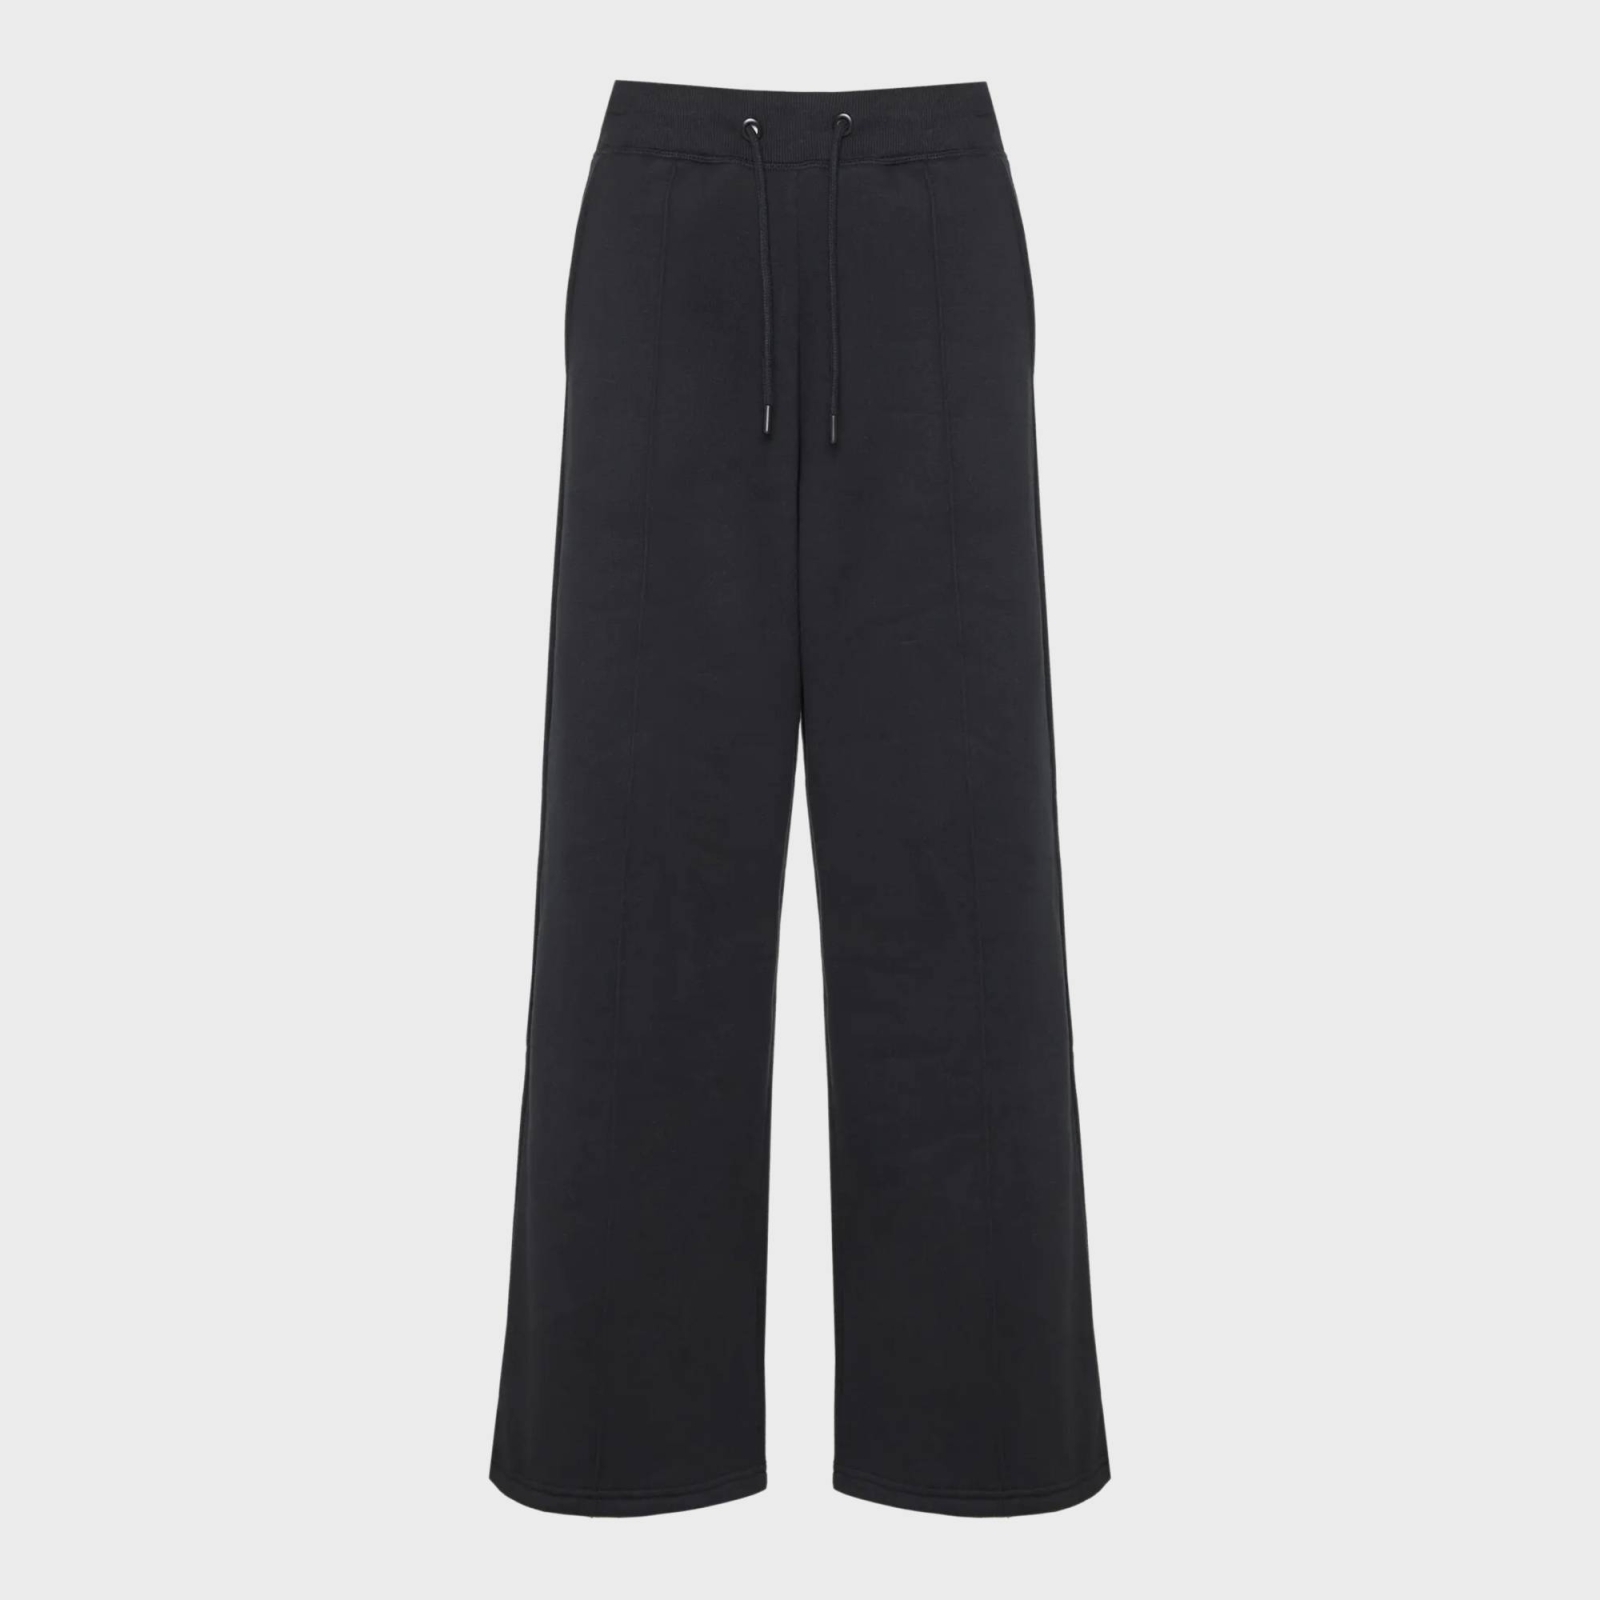 FUNKY HIGH RISE PANT